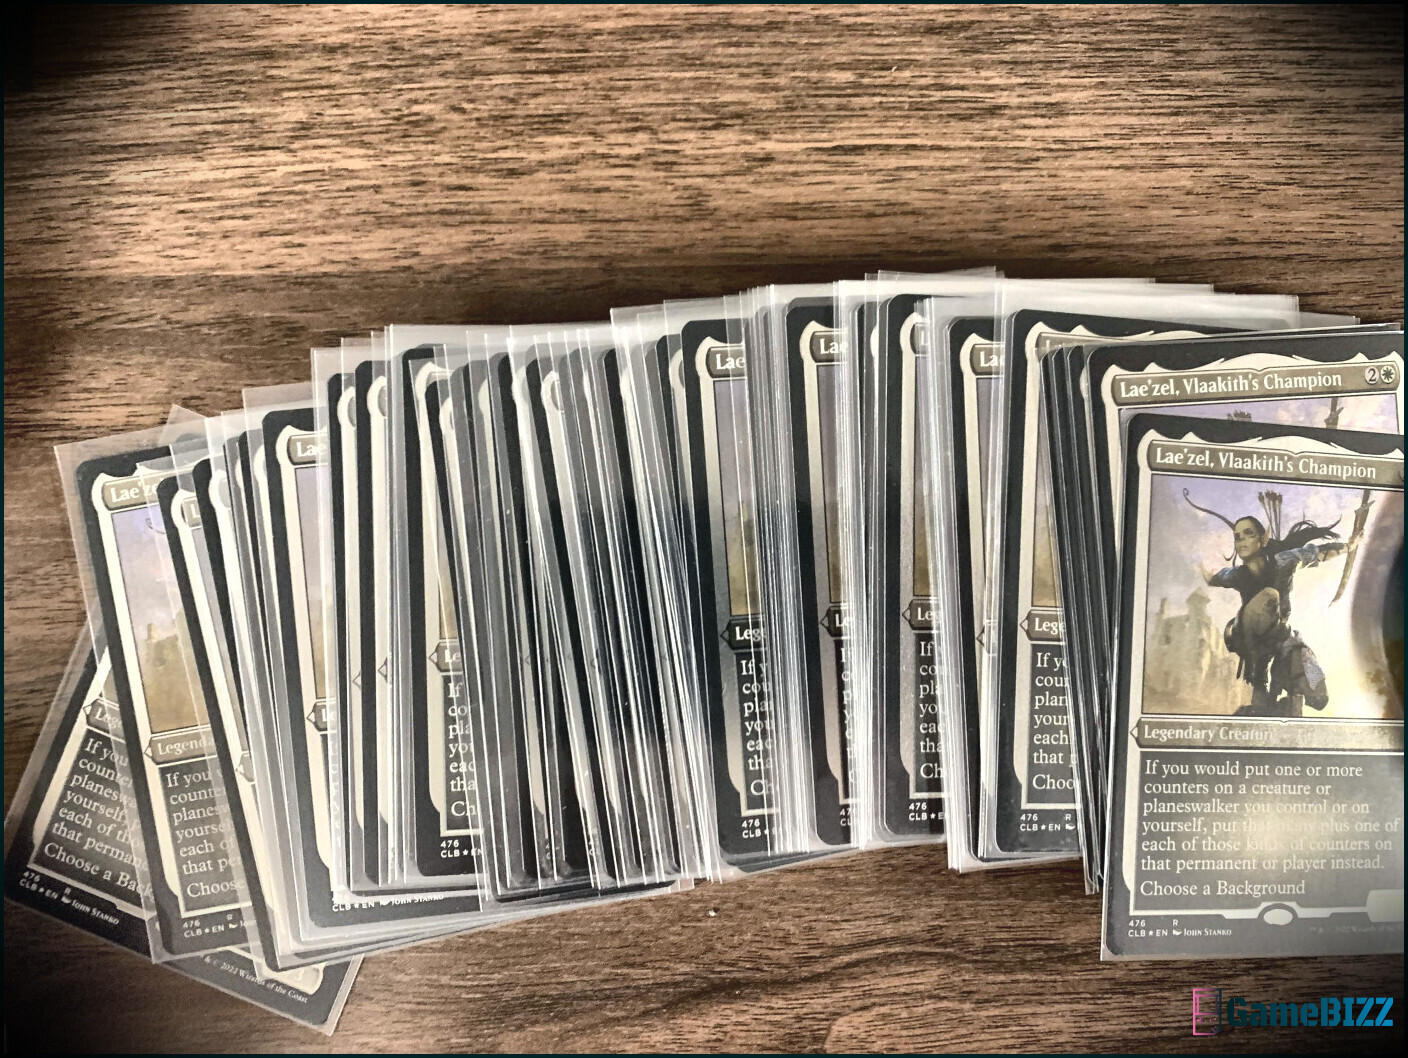 MTG-Einzelhändler Troll And To To Stop Selling Singles Due To Constant Reprints